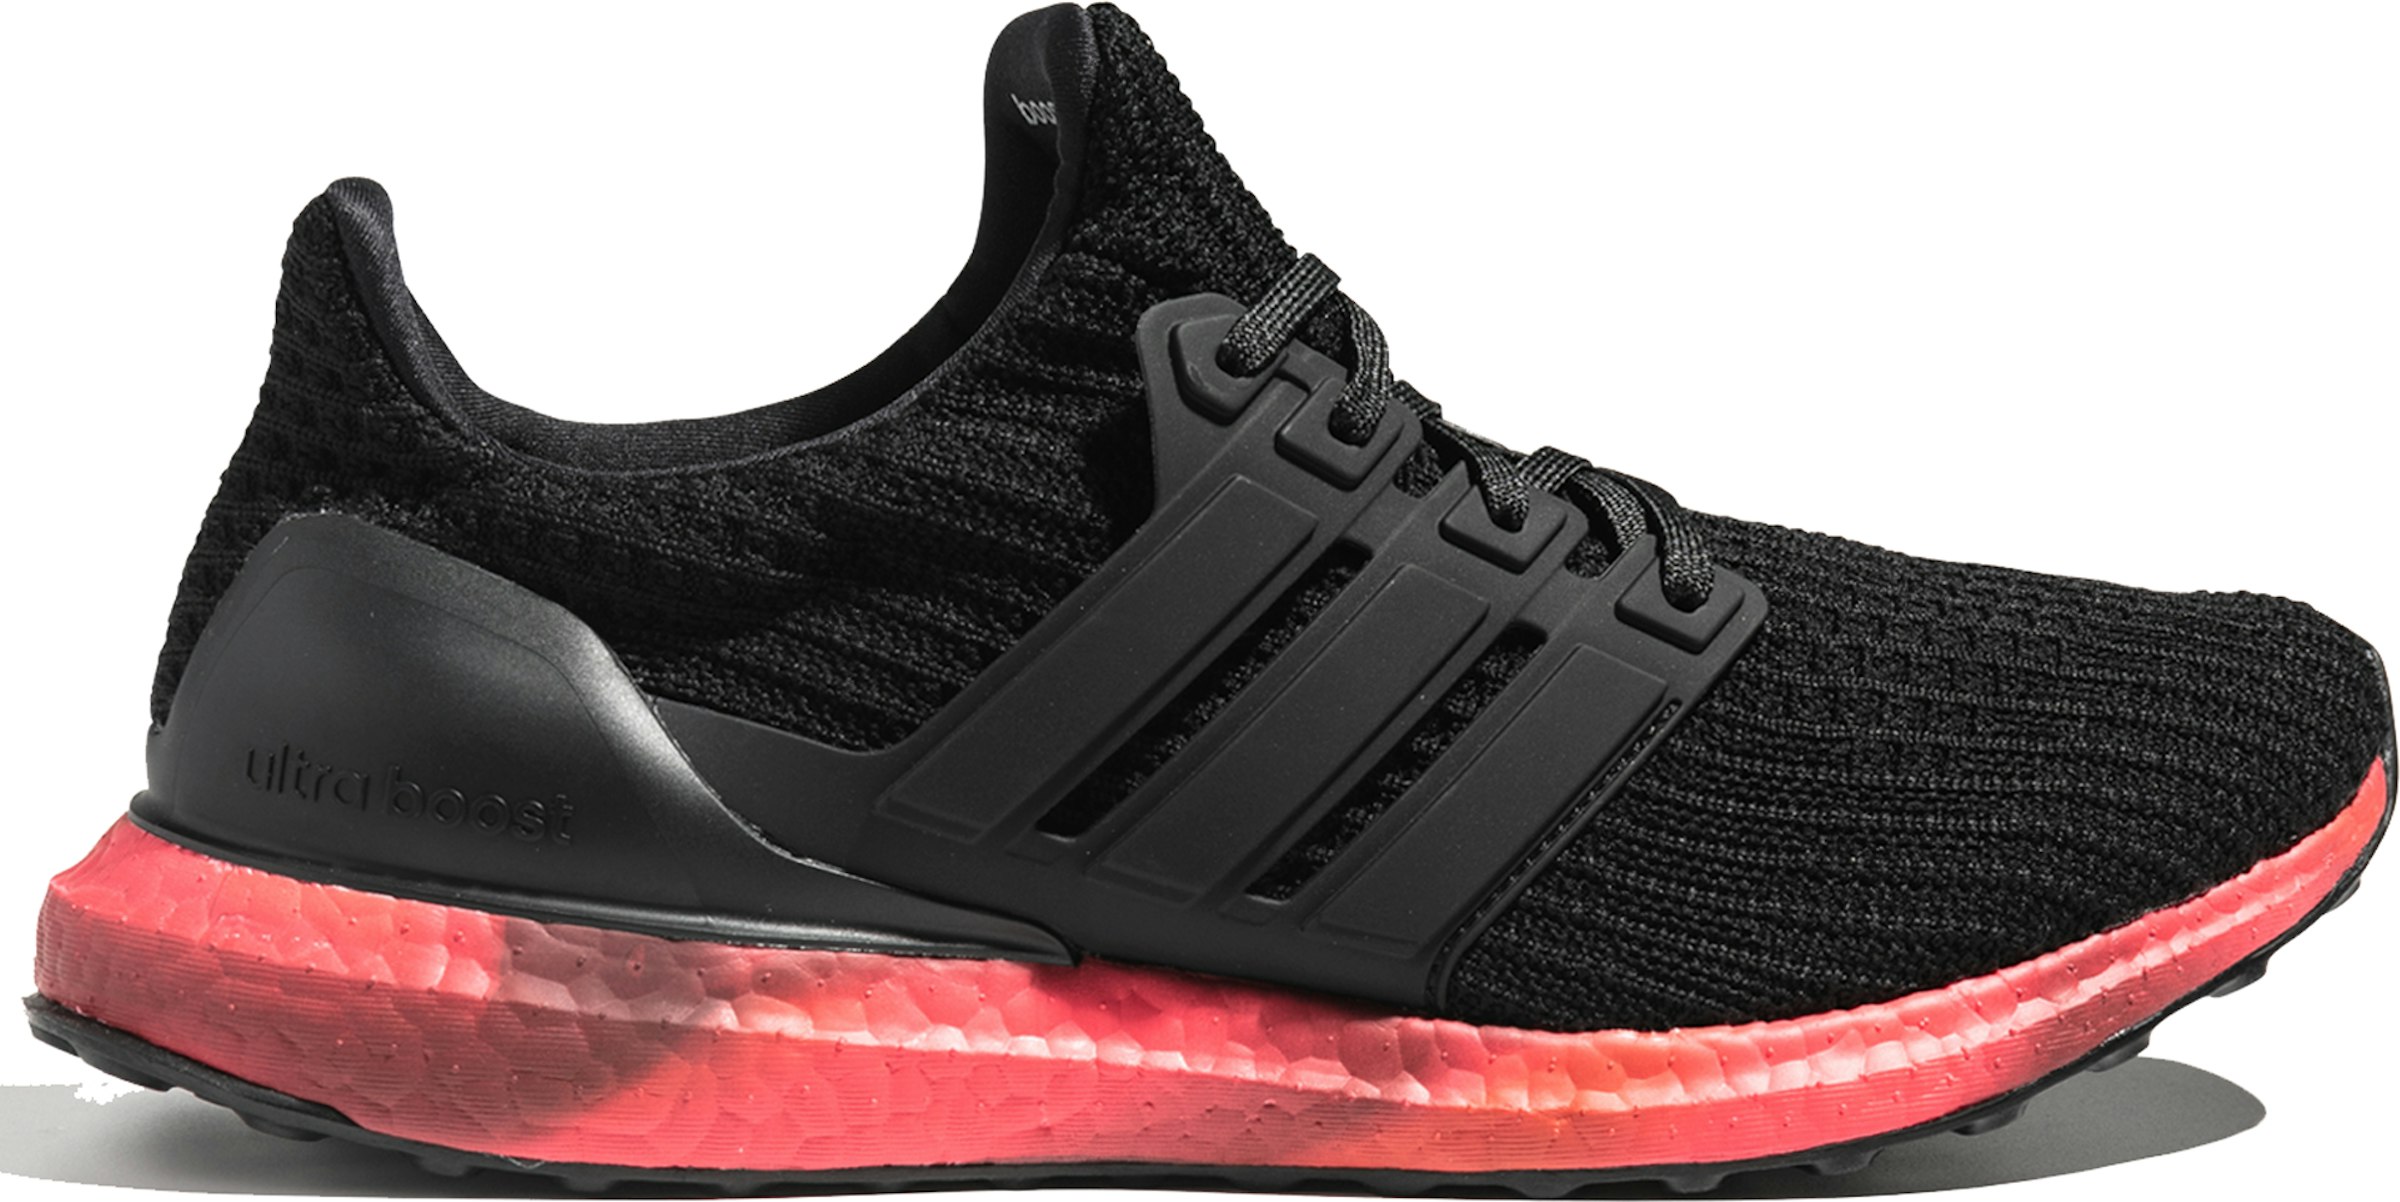 adidas Ultra Boost Sole Red Men's - FV7282 - US